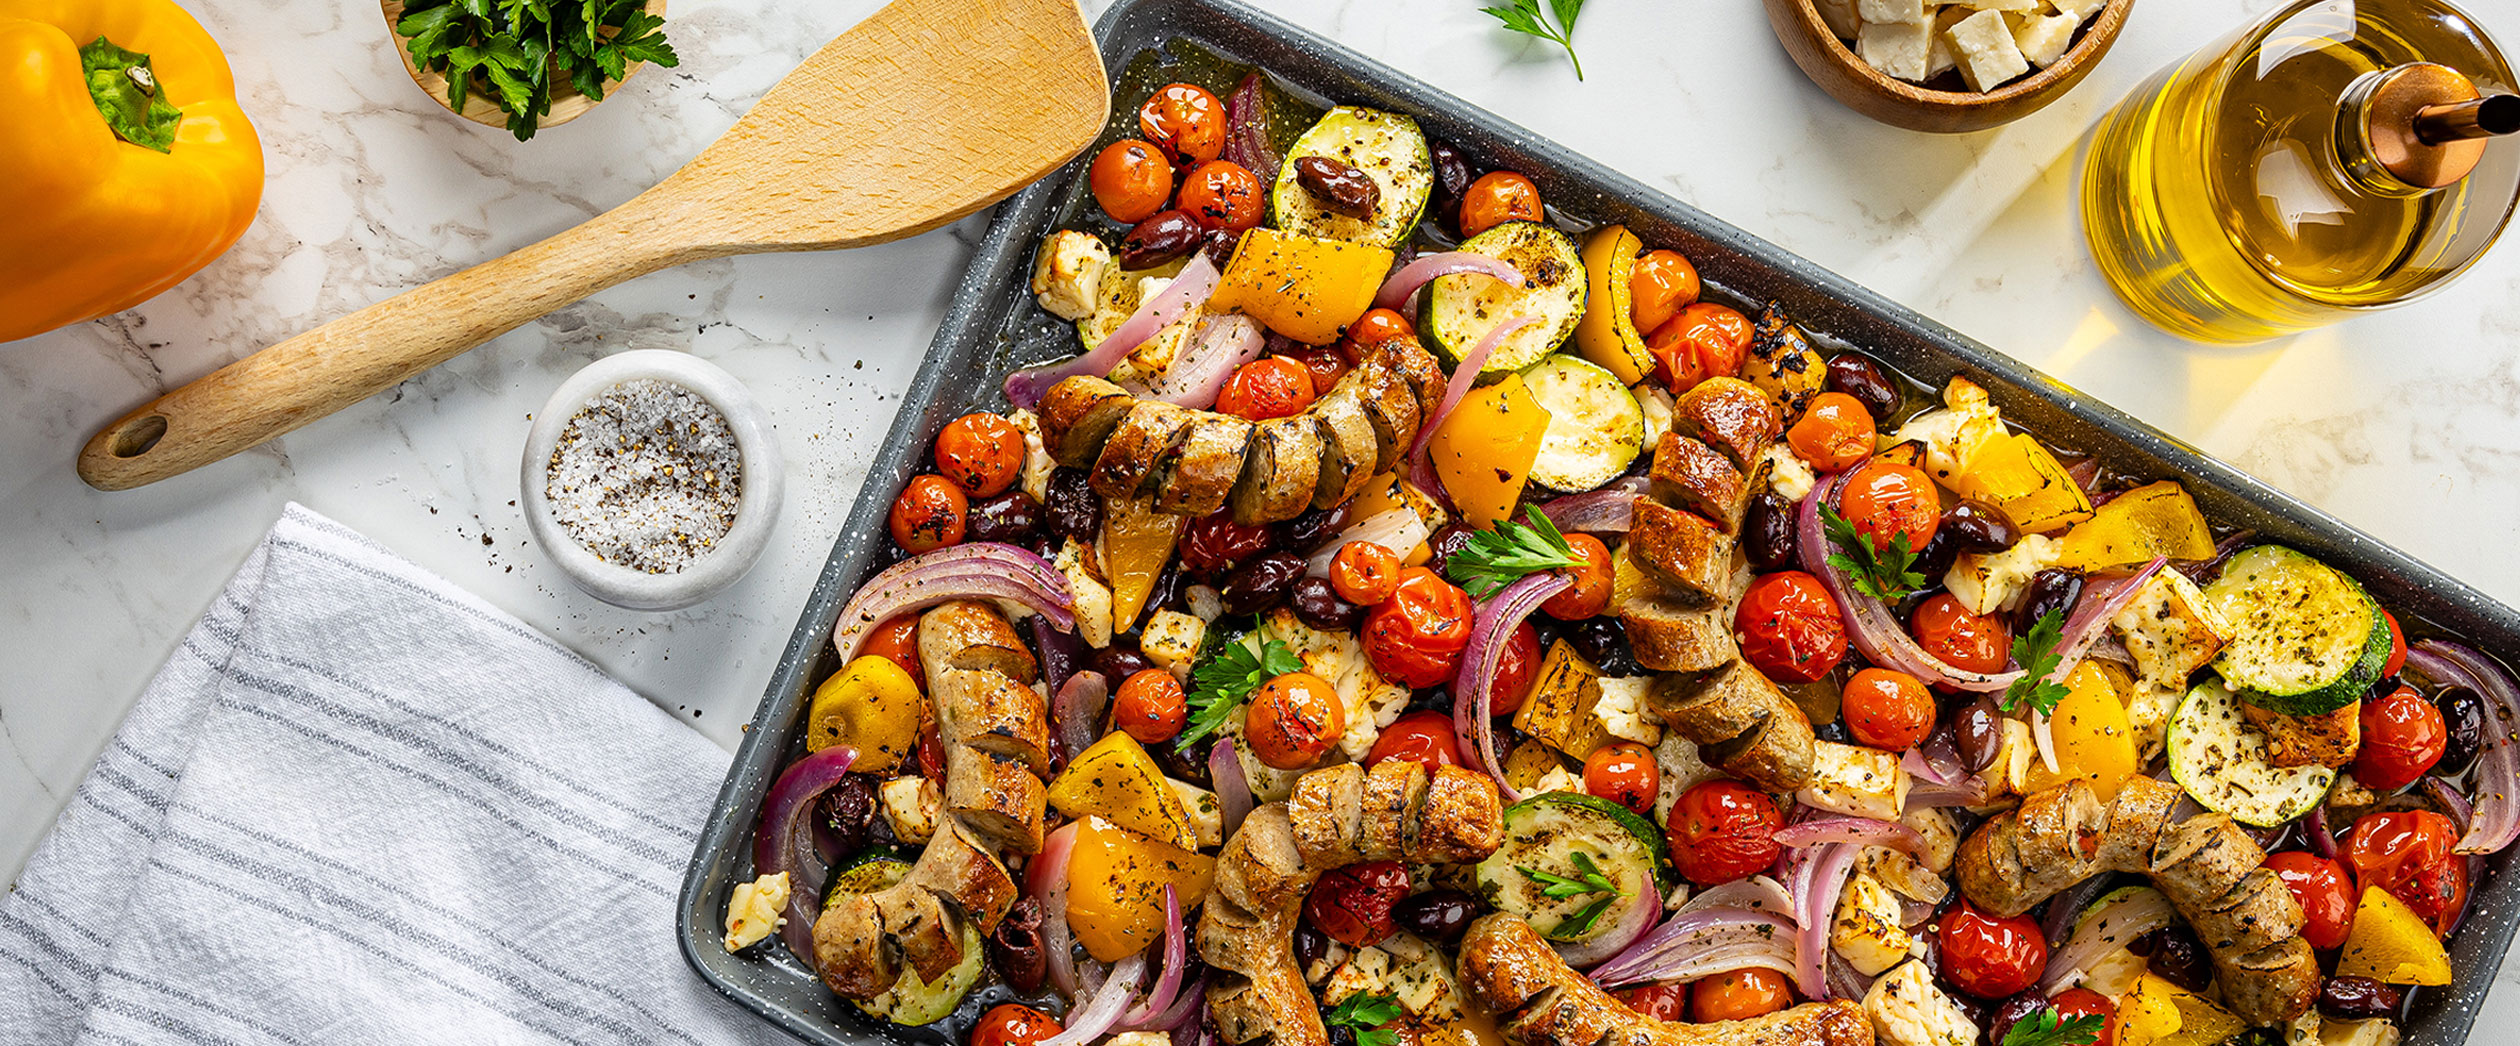 Greek Sheet Pan Dinner with Al Fresco Chicken Sausage and Fresh Vegetables